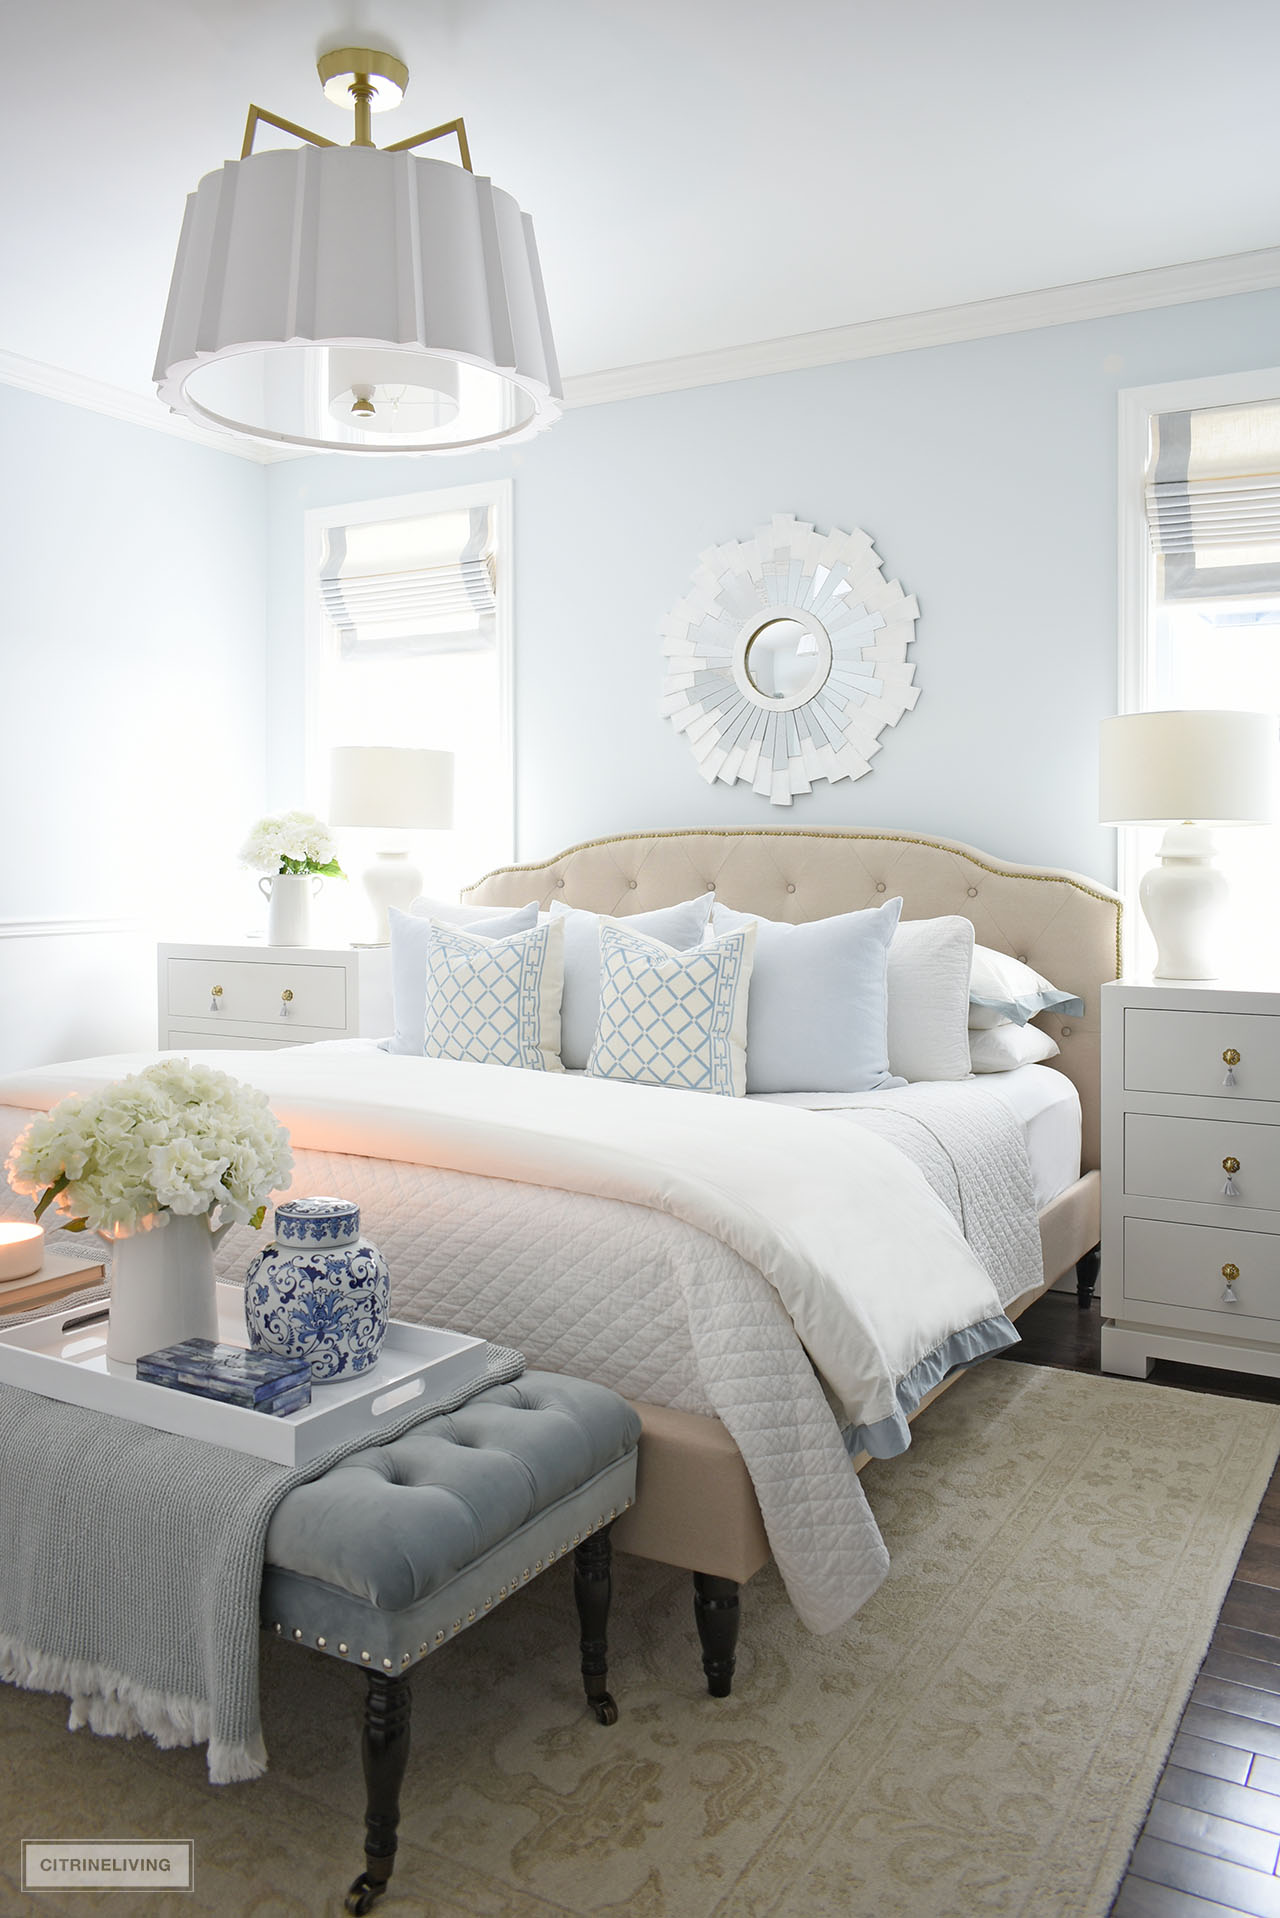 Calming bedroom decor in soft blue and white. Layers of quilted bedding, throw pillows and pretty accents create a serene bedroom.